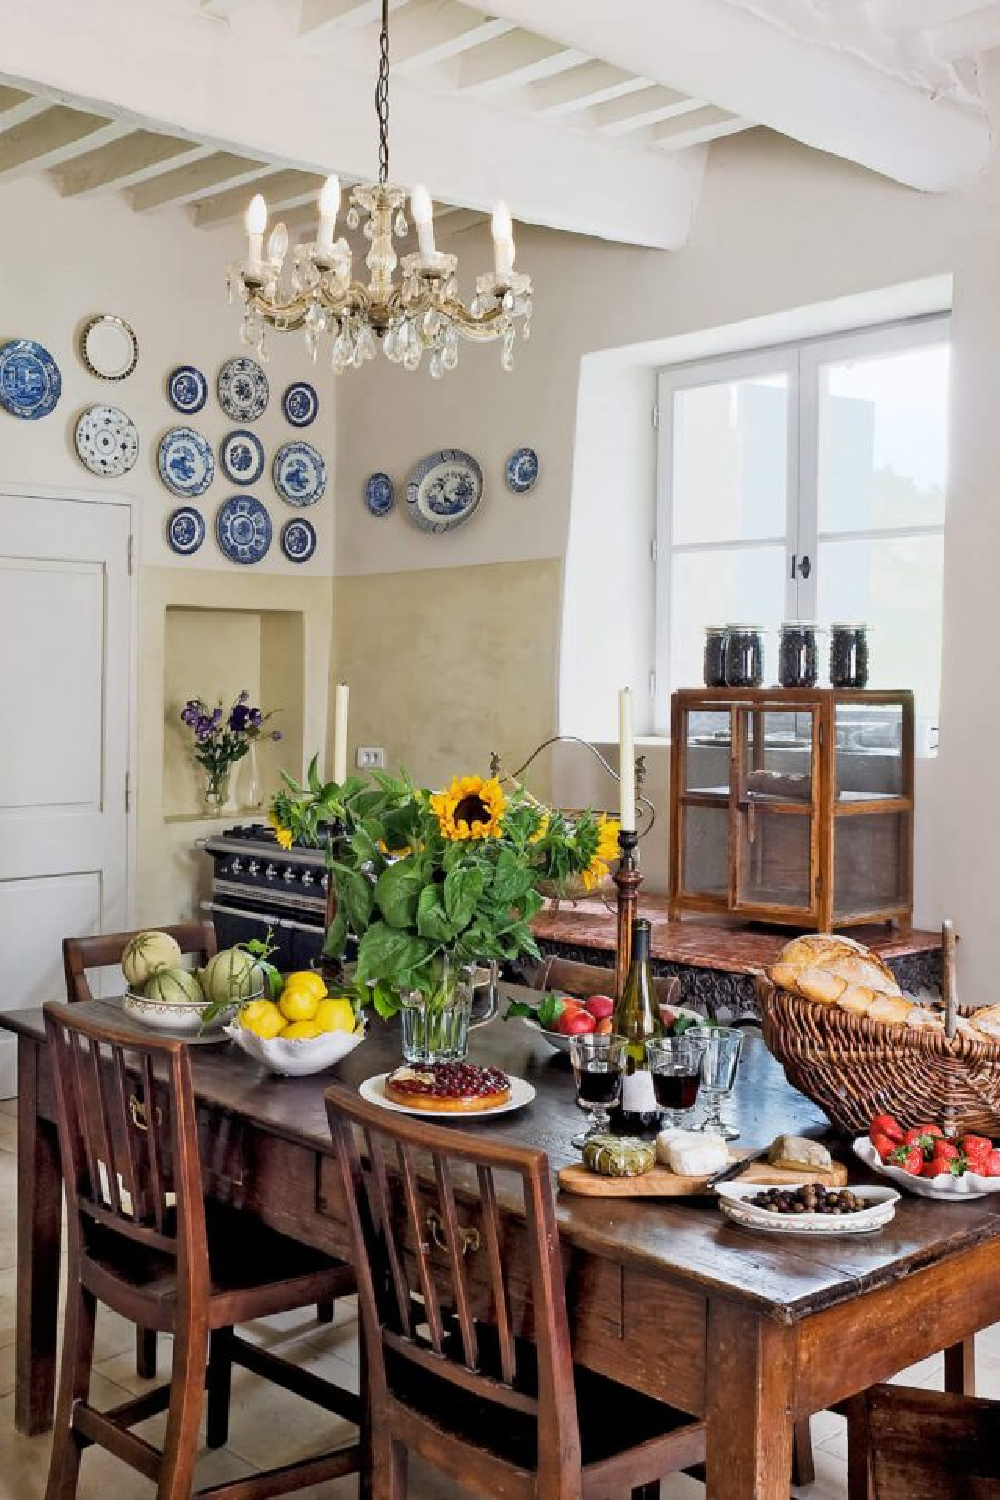 Traditional French Country kitchen in Provence in a villa available from HavenIn. #frenchcountrykitchen #frenchkitchen Rrustickitchens #provencekitchen